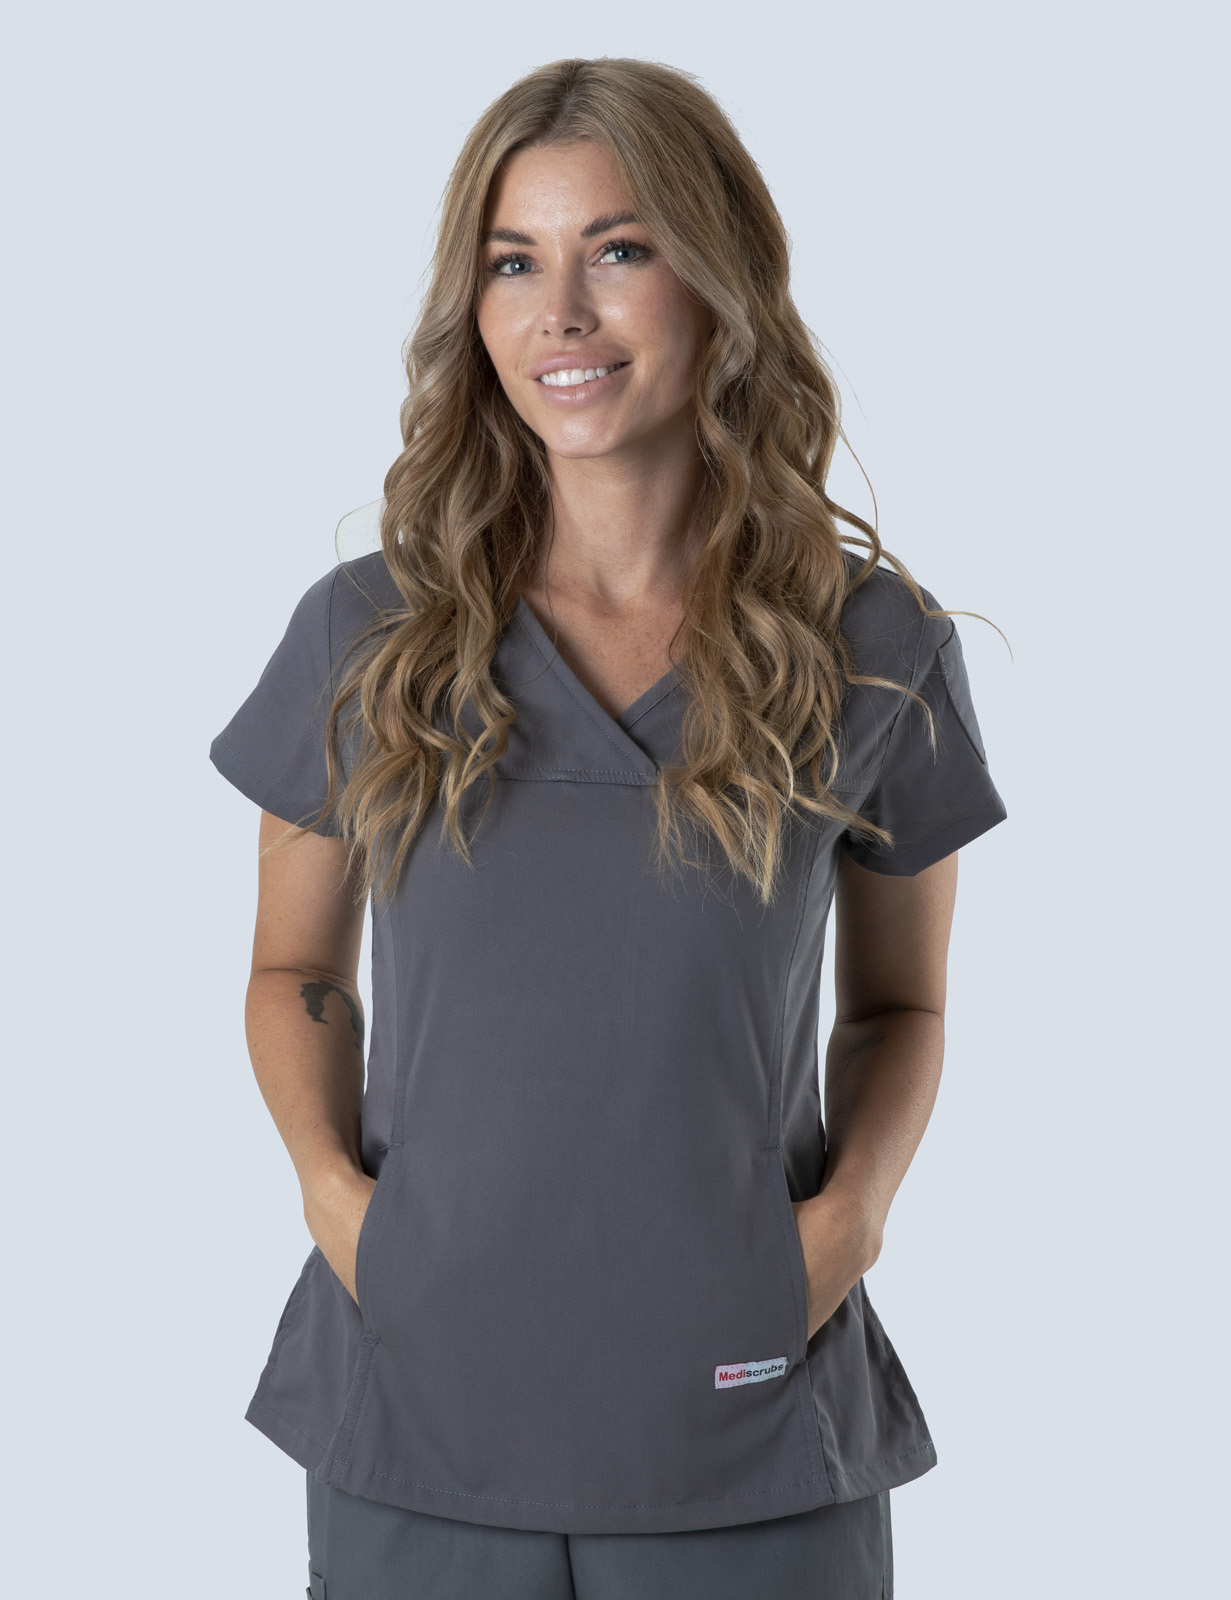 UQ Vets Gatton General Practitioner Uniform Top Only Bundle (Women's Fit Solid Top in Steel Grey incl Logos)